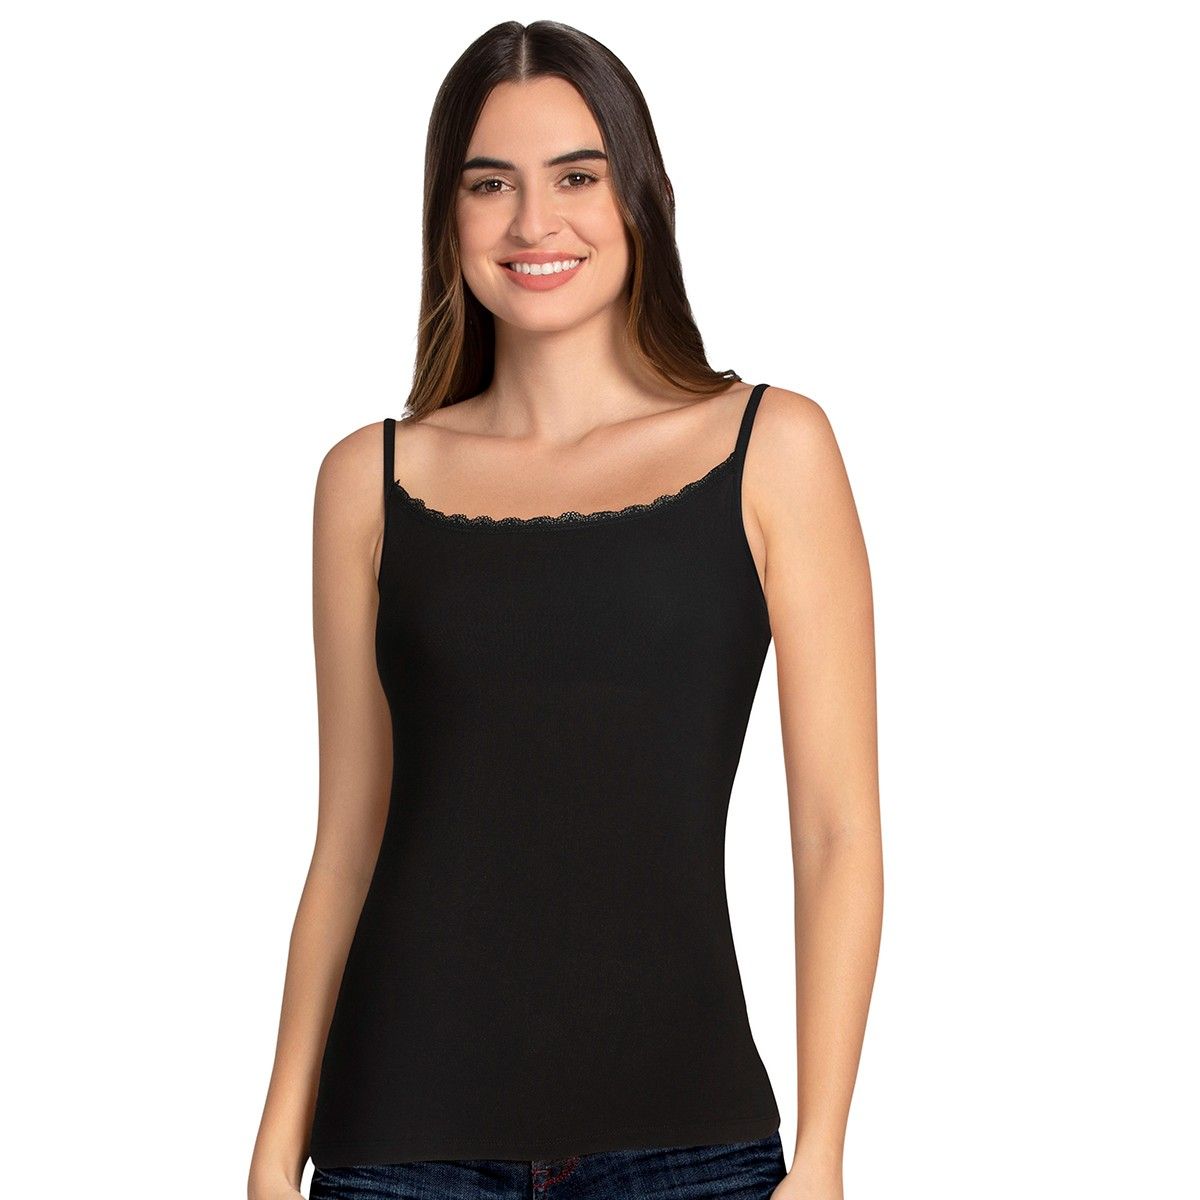 Buy Amante Support Scoop Neck Cami Bra - Removable Pads - Black (M) online